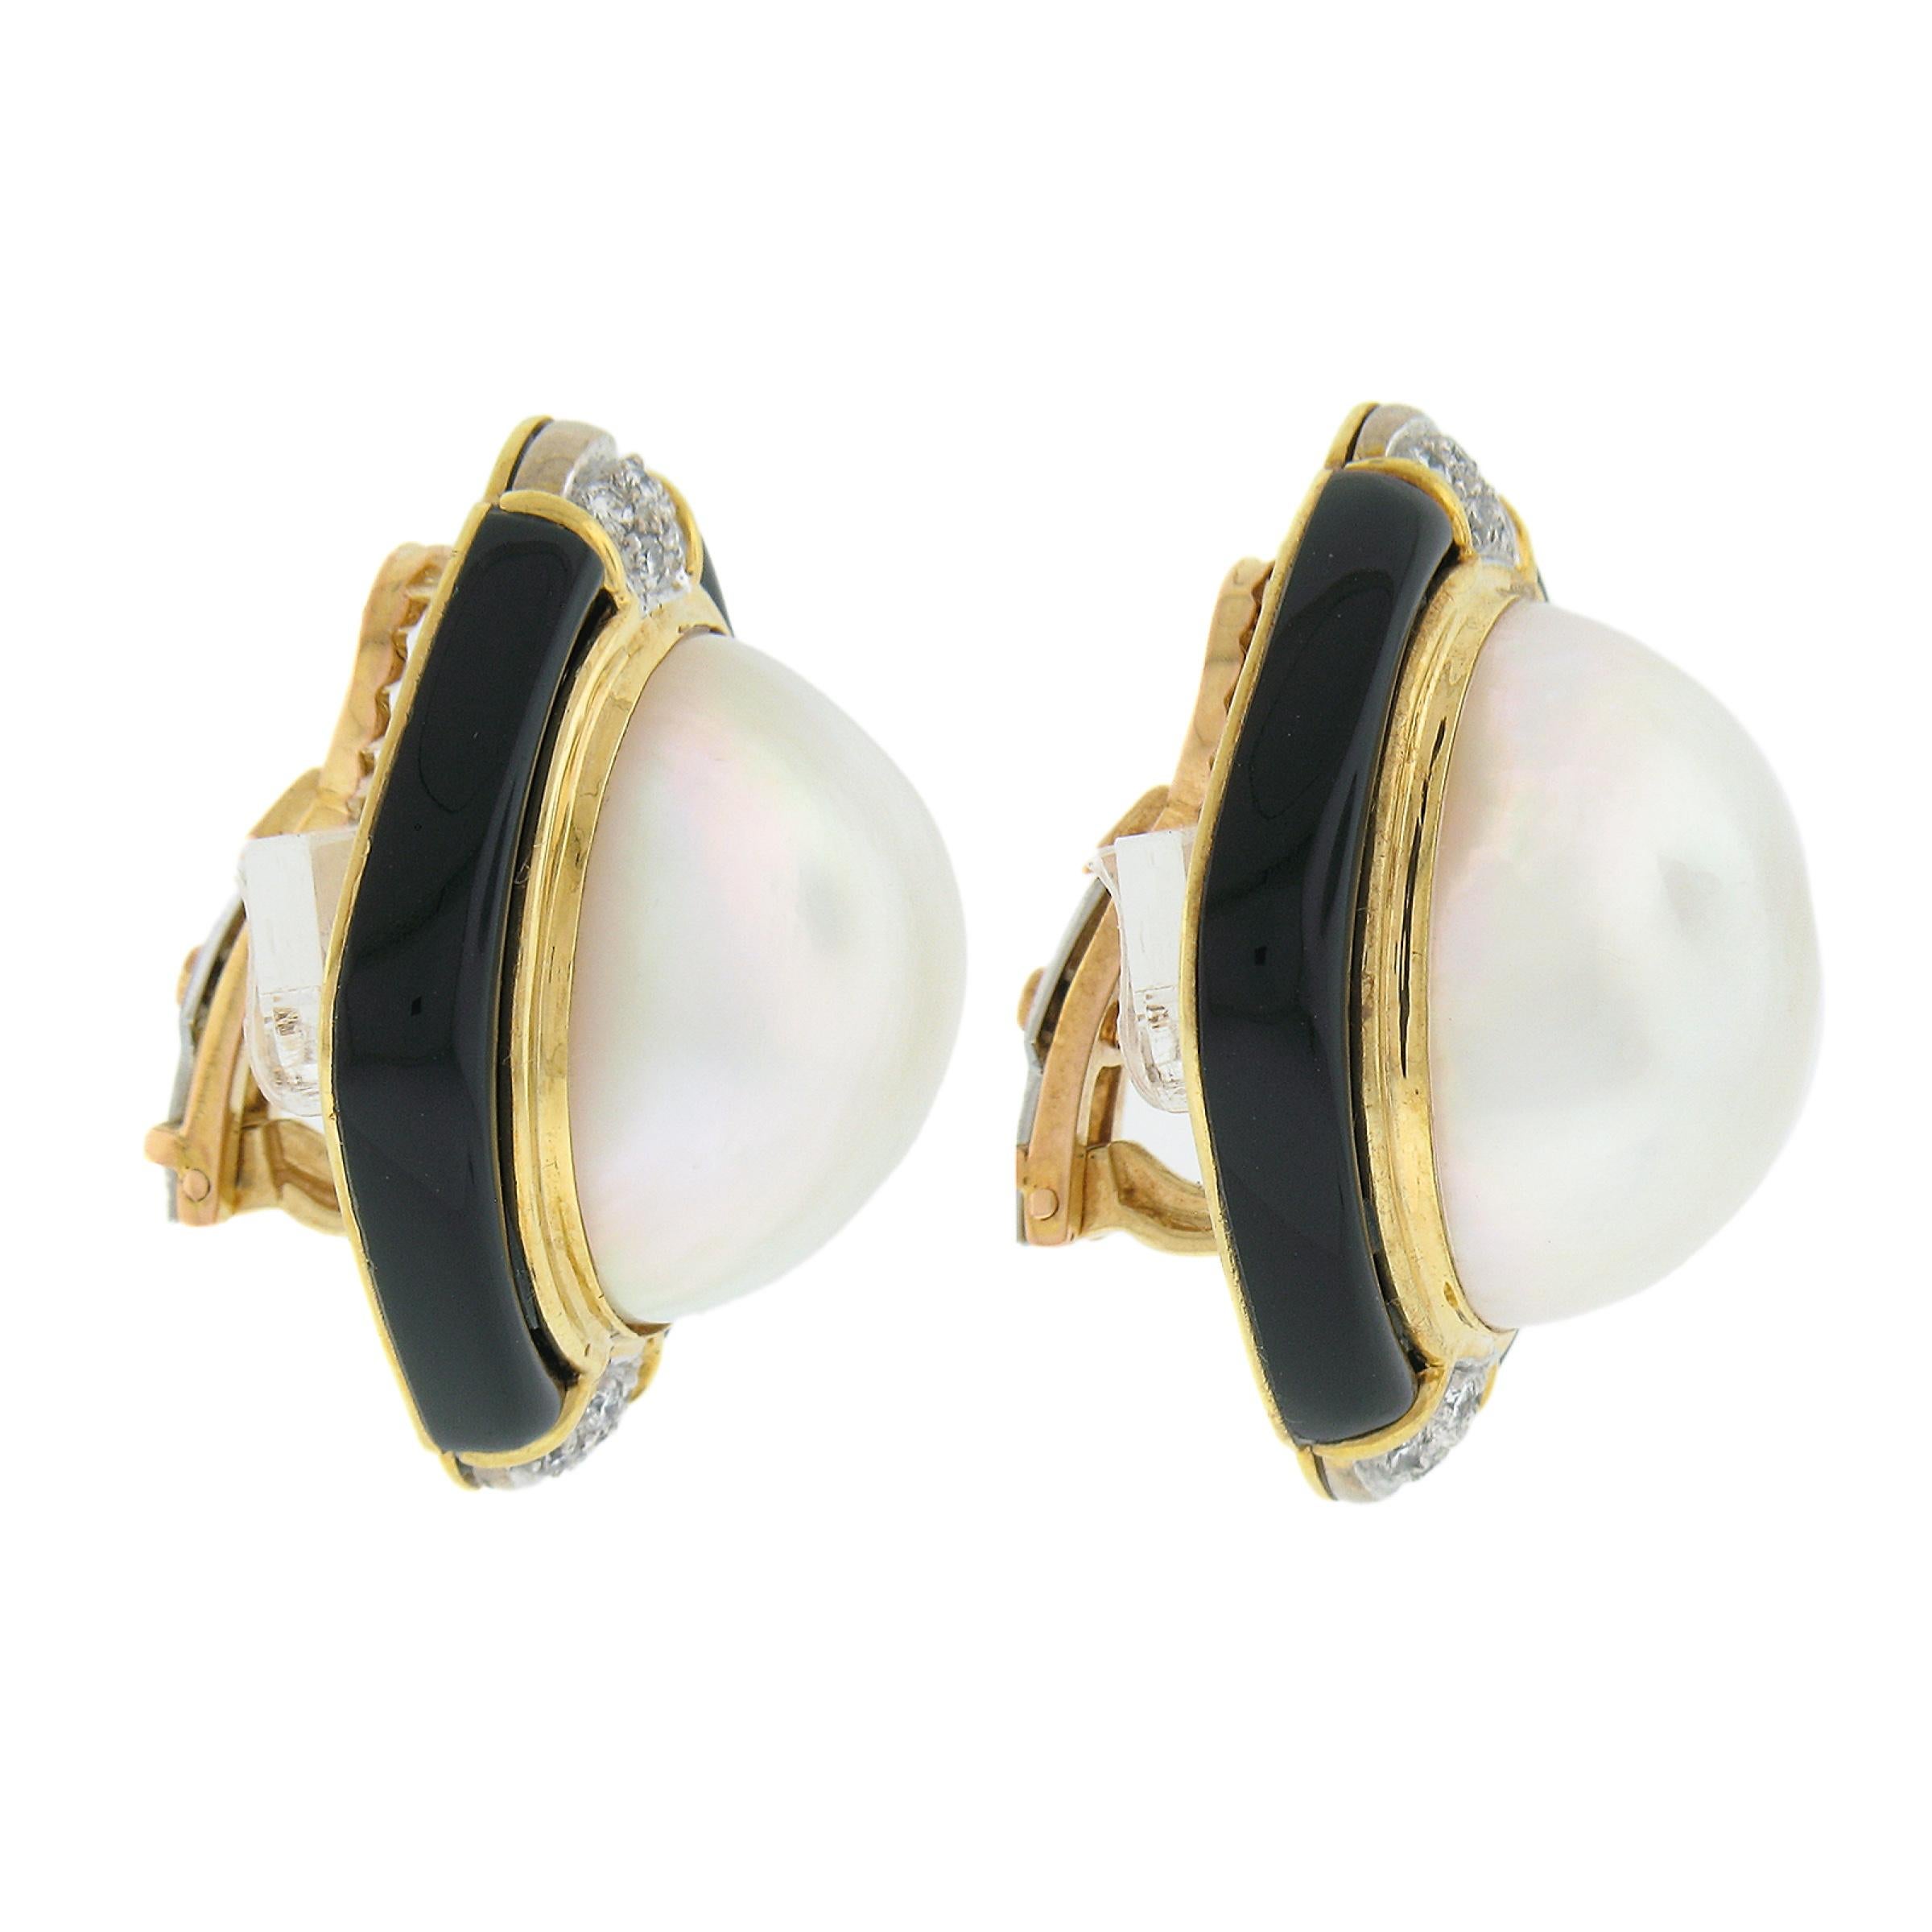 Vintage 18K Gold Large Mabe Pearl Diamond & Black Onyx Frame Button Earrings In Excellent Condition For Sale In Montclair, NJ